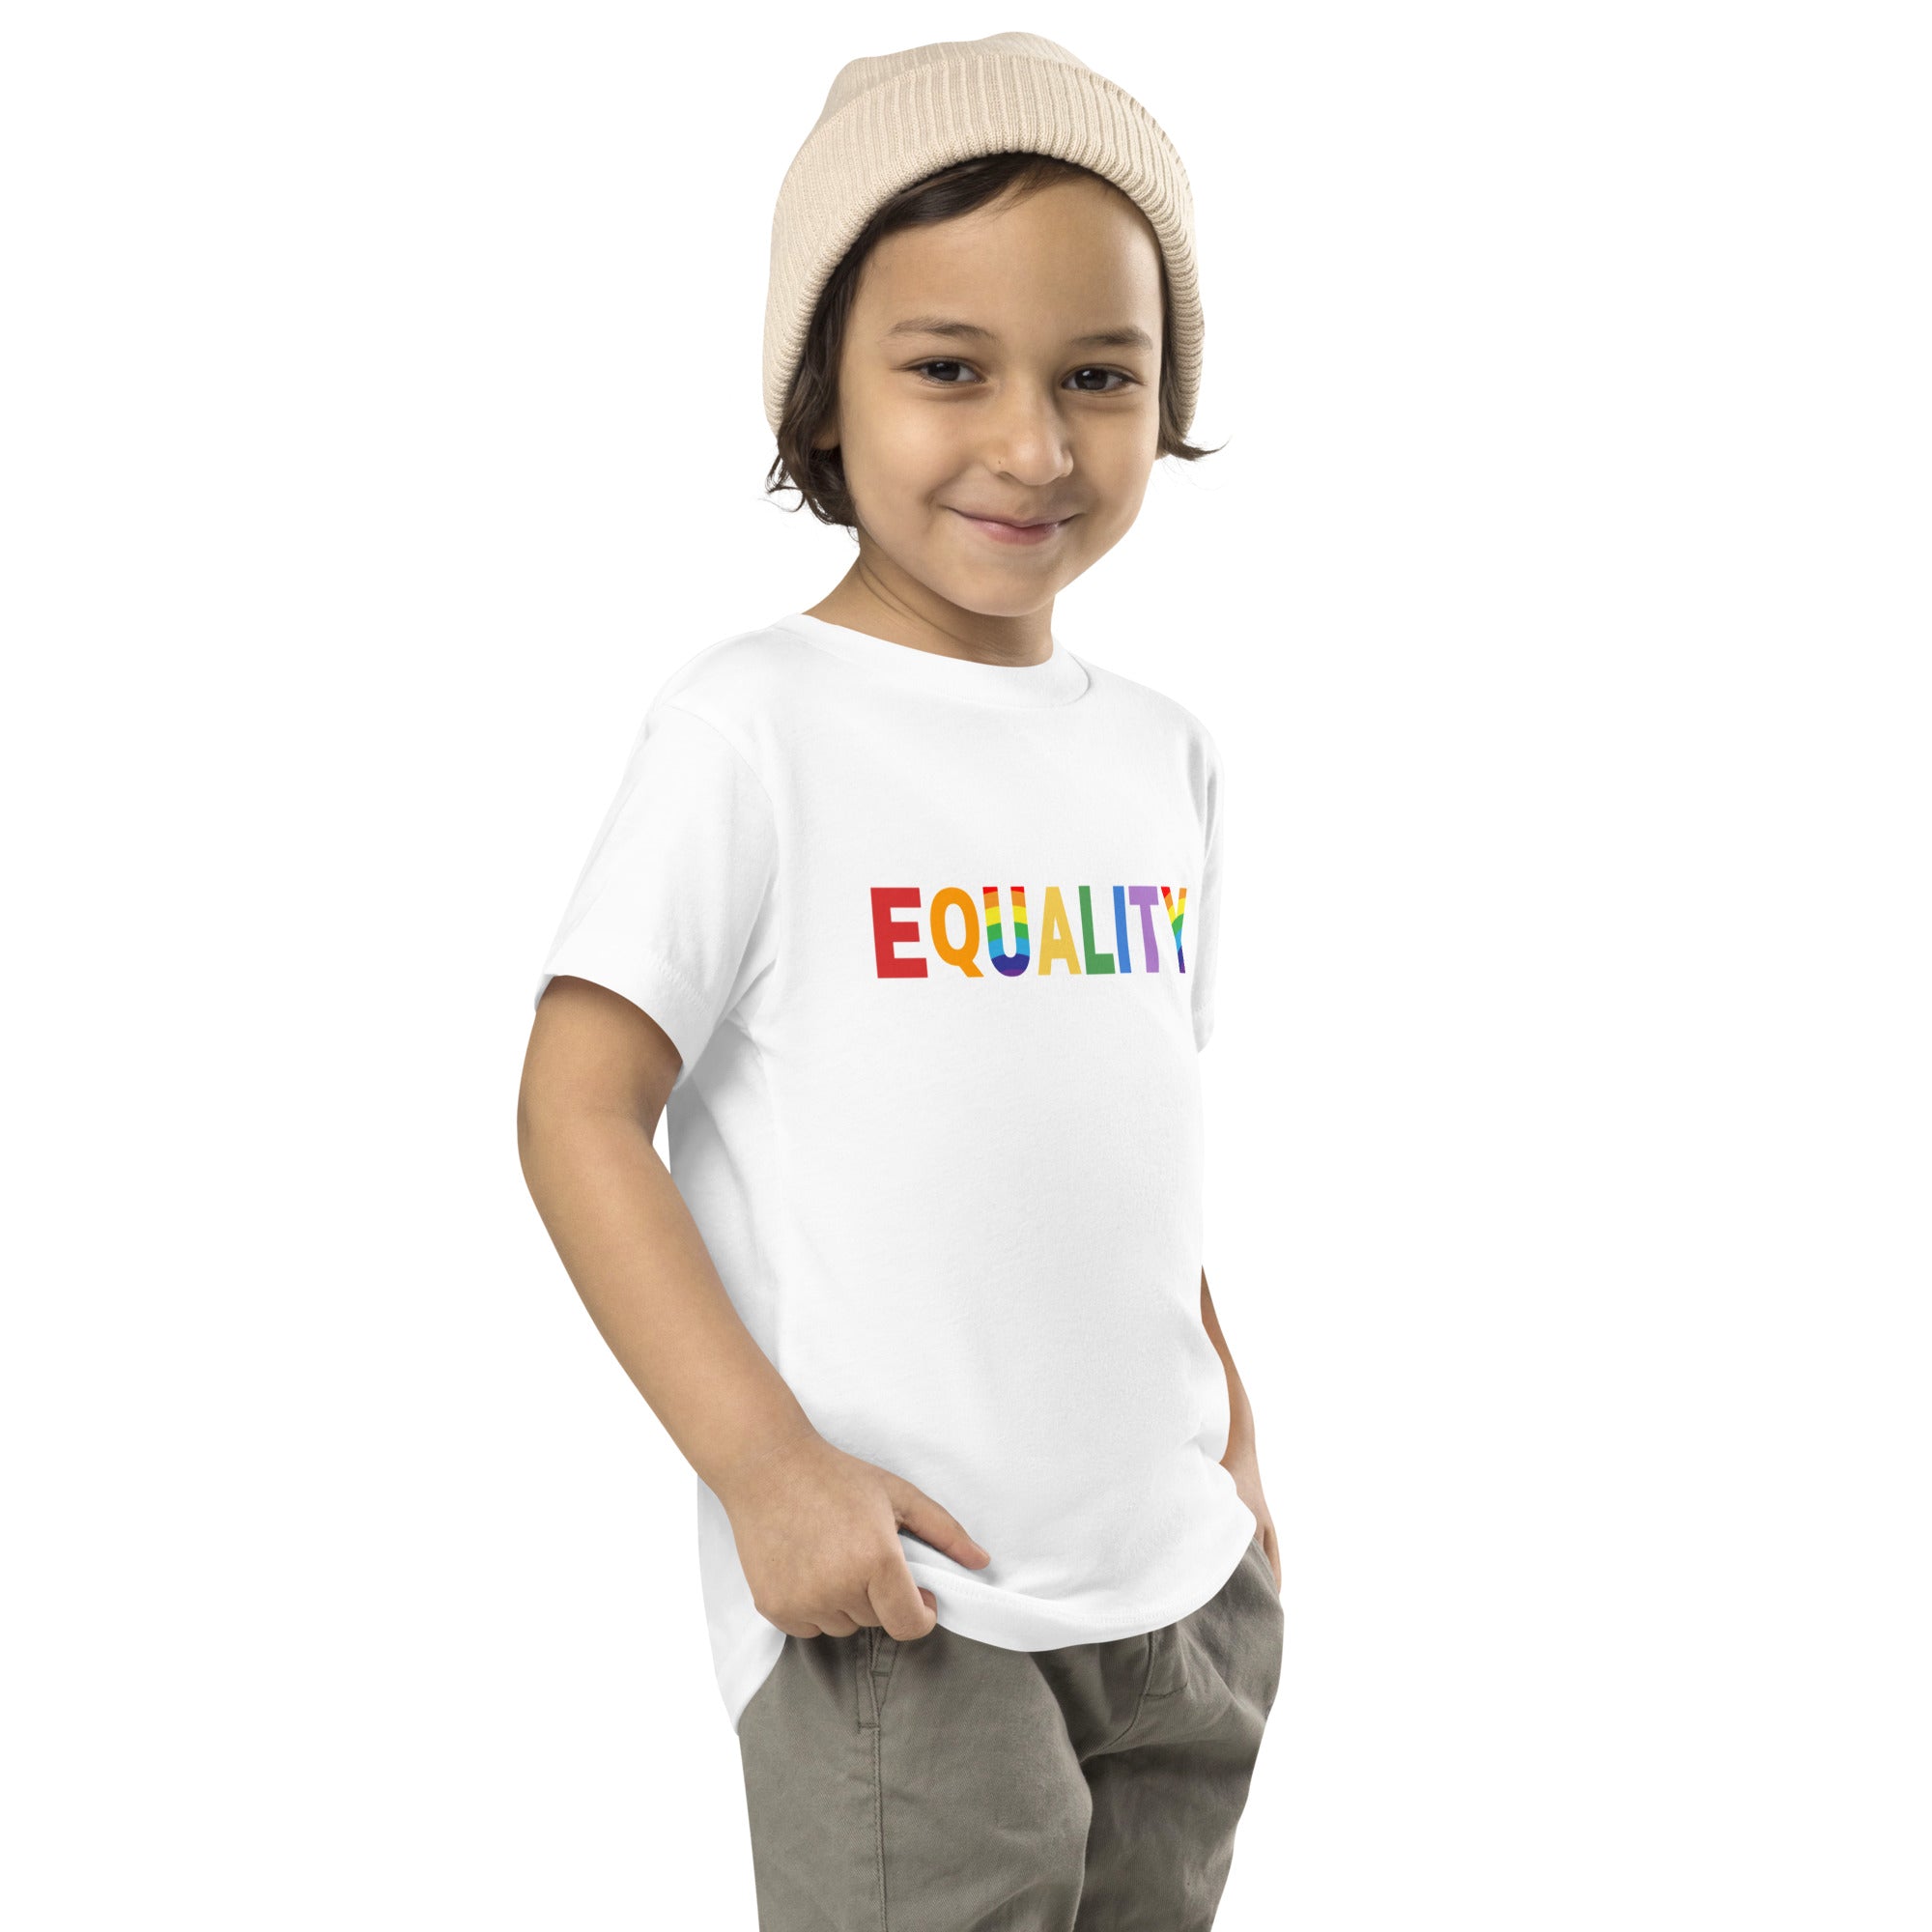 Equality - Toddler Short Sleeve Tee